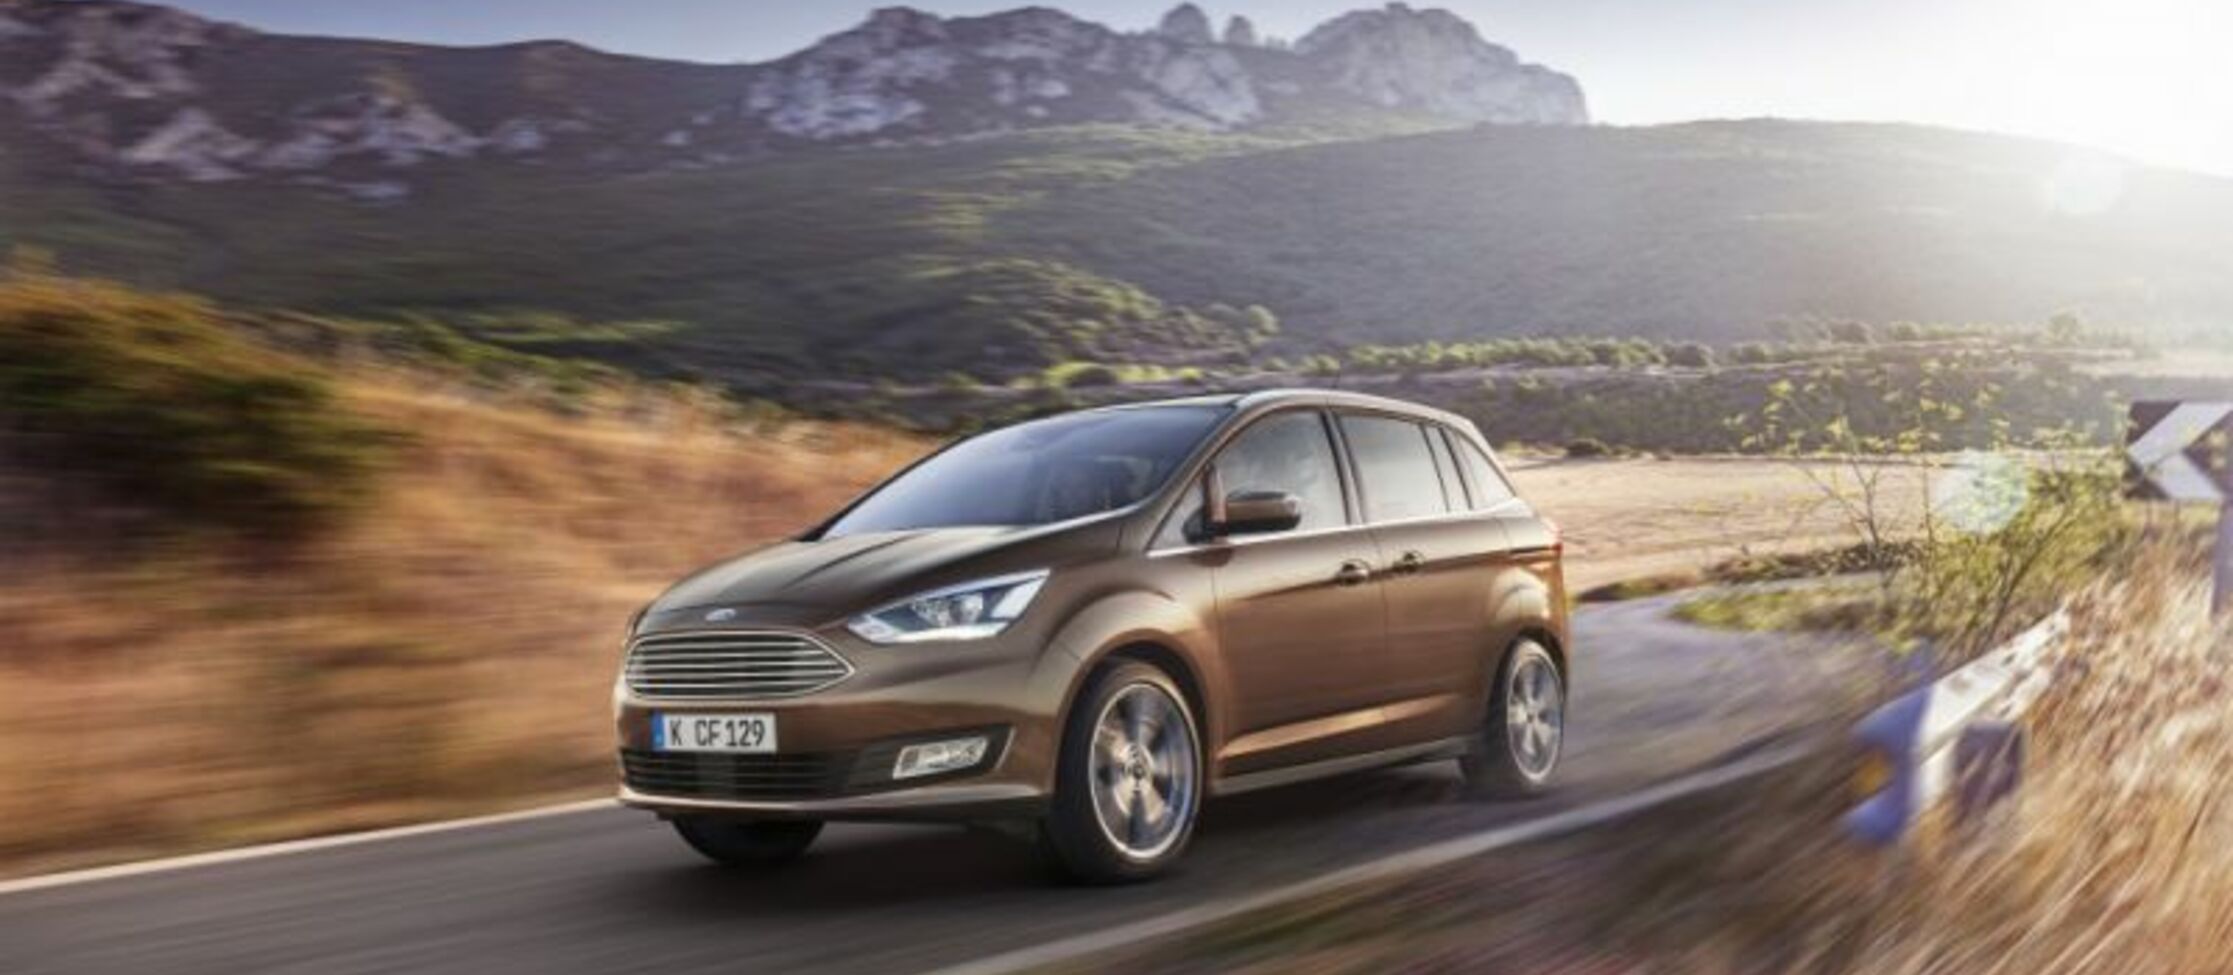 Ford Grand C-MAX (facelift 2015) 1.5 EcoBoost (182 Hp) PowerShift S&S 7 Seat 2015, 2016, 2017, 2018